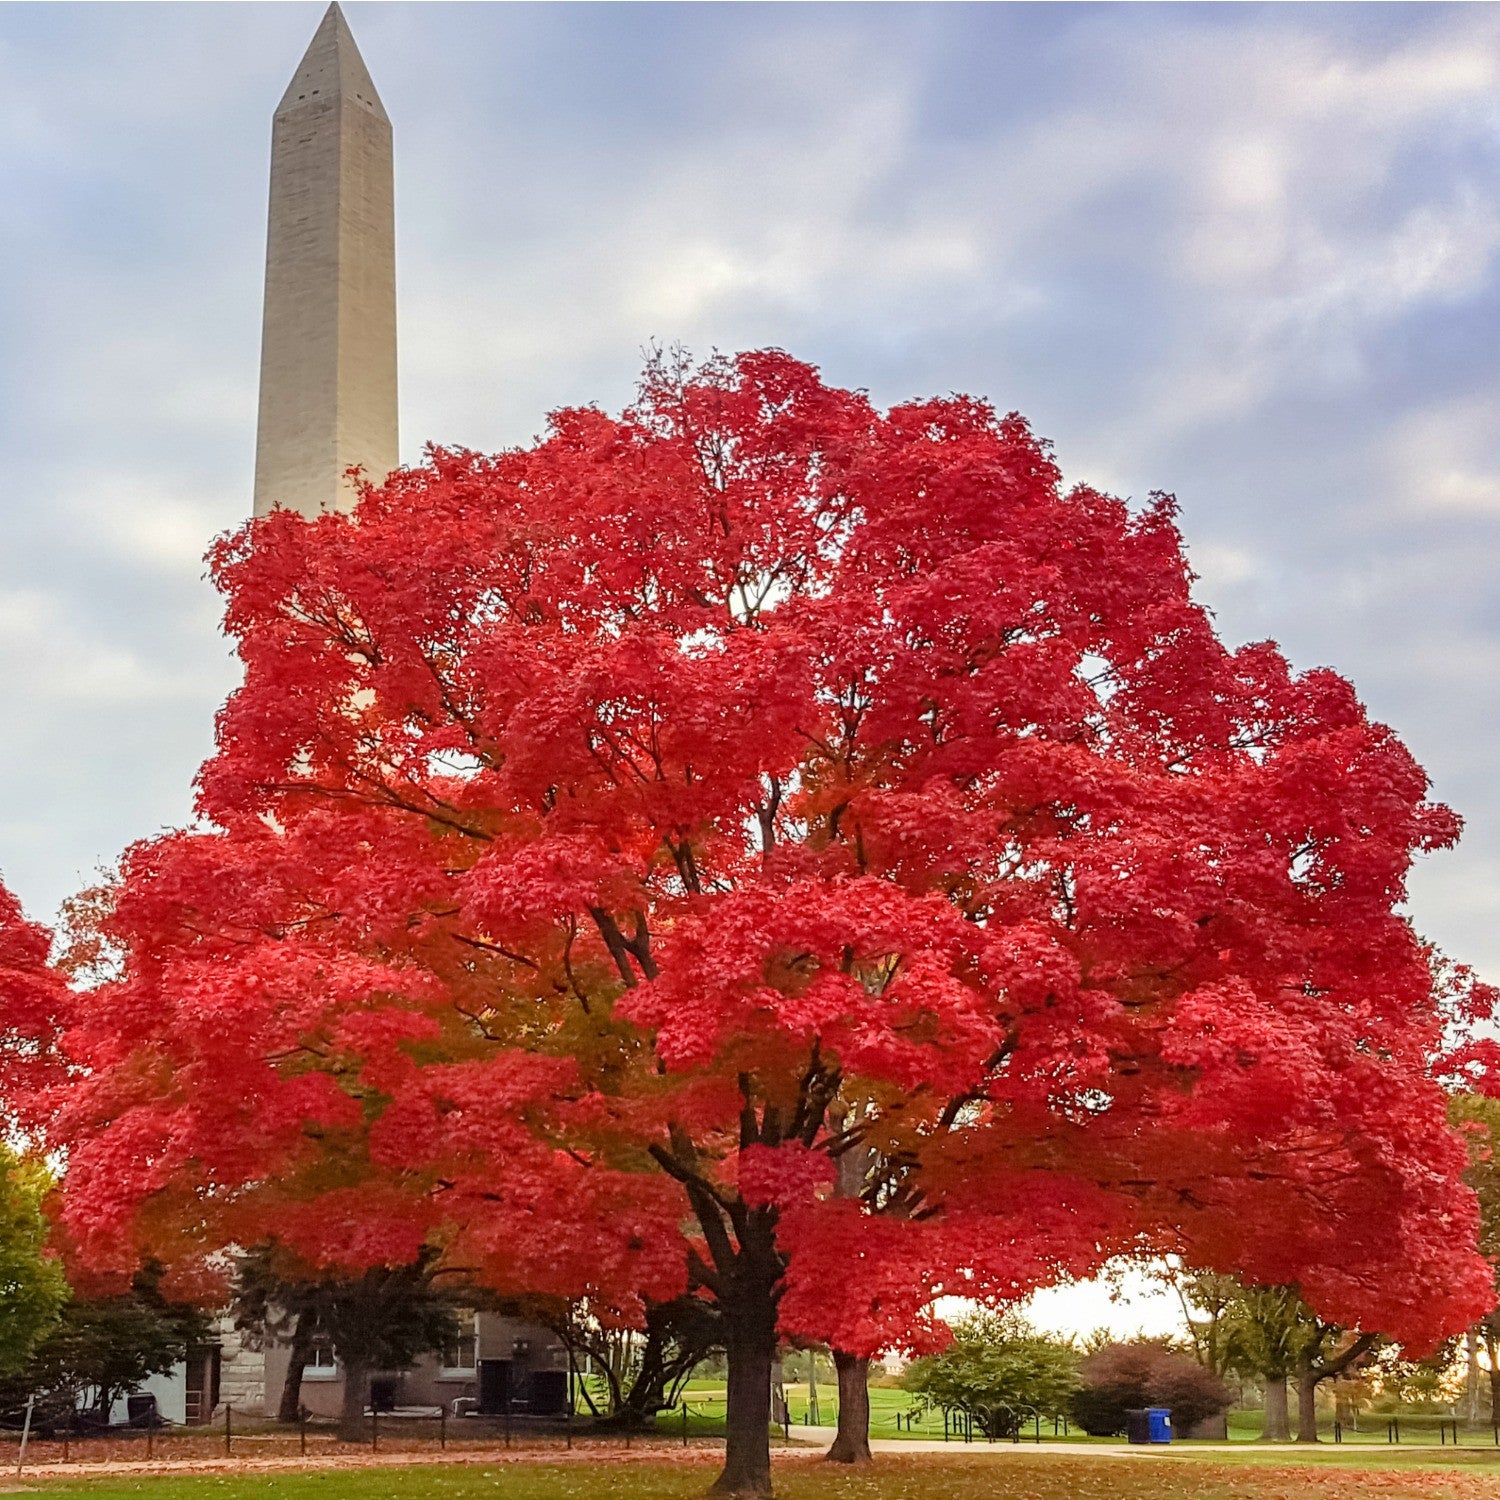 The Majestic Red Maple